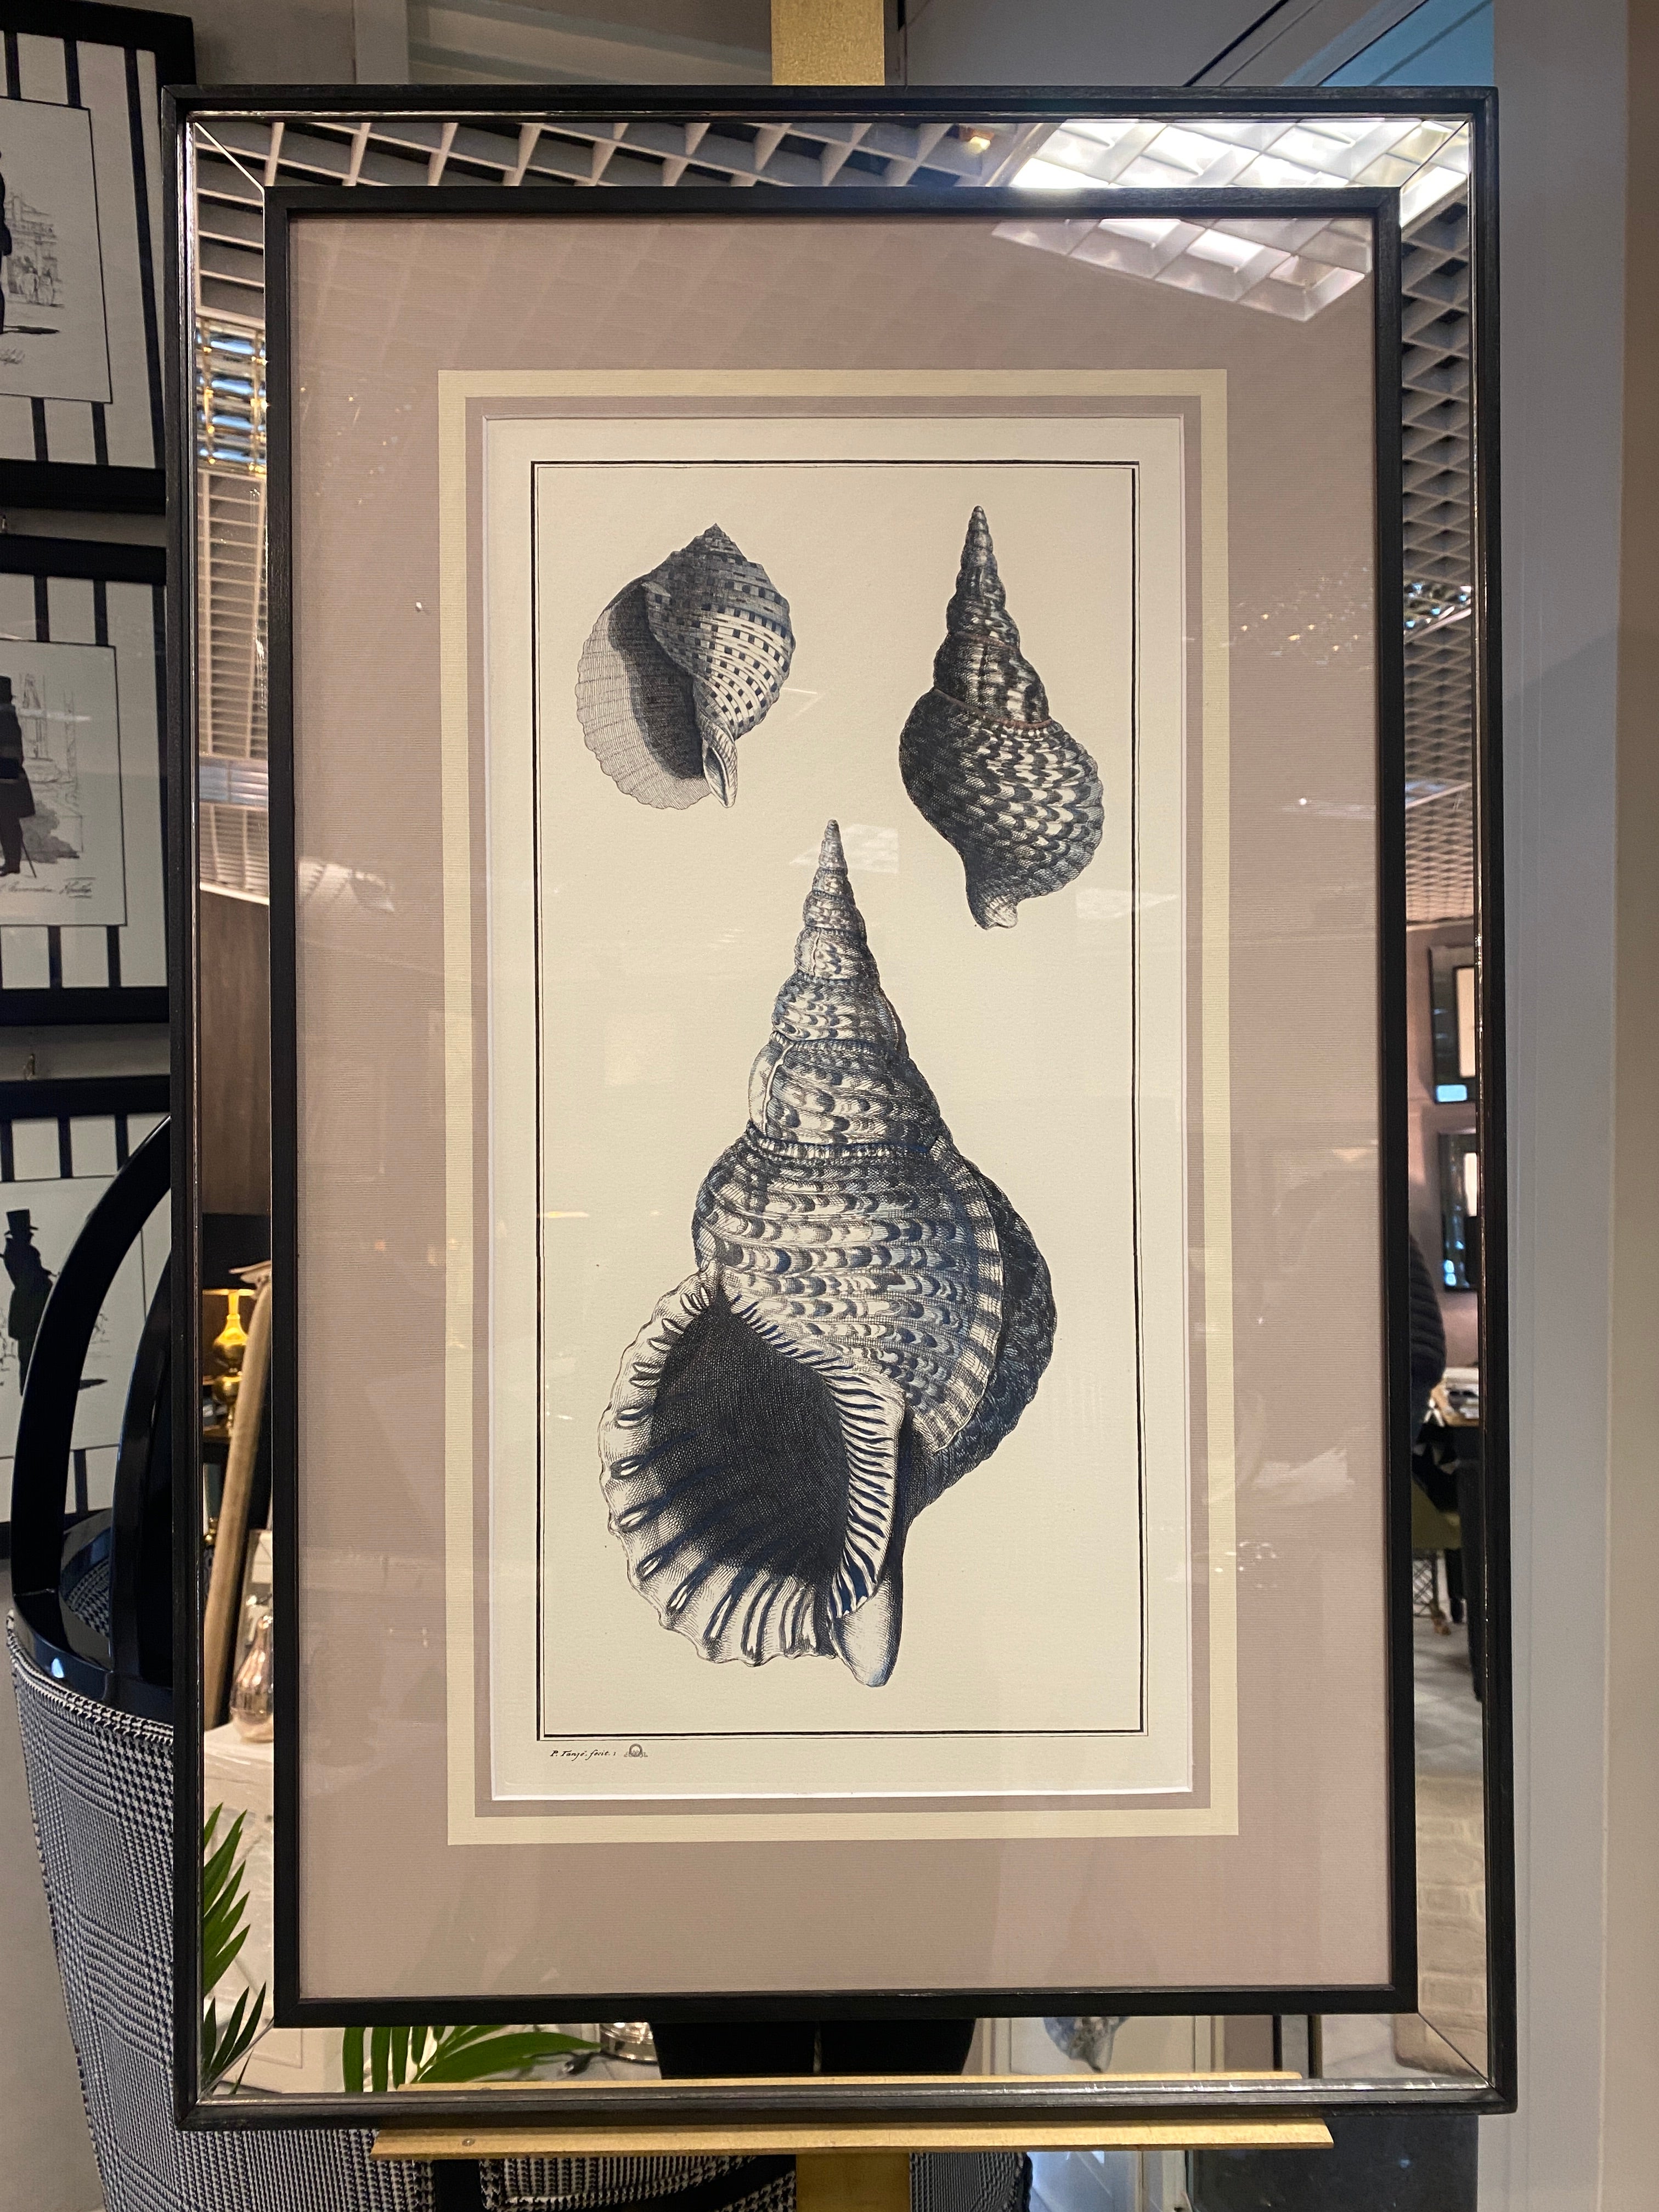 Elegant hand-watercoloured shell printed on aged paper and accompanied by a beautiful frame made of black mirrors and silver-painted wood.

This botanical style print is available in 2 different natural representations to create a bright and joyful